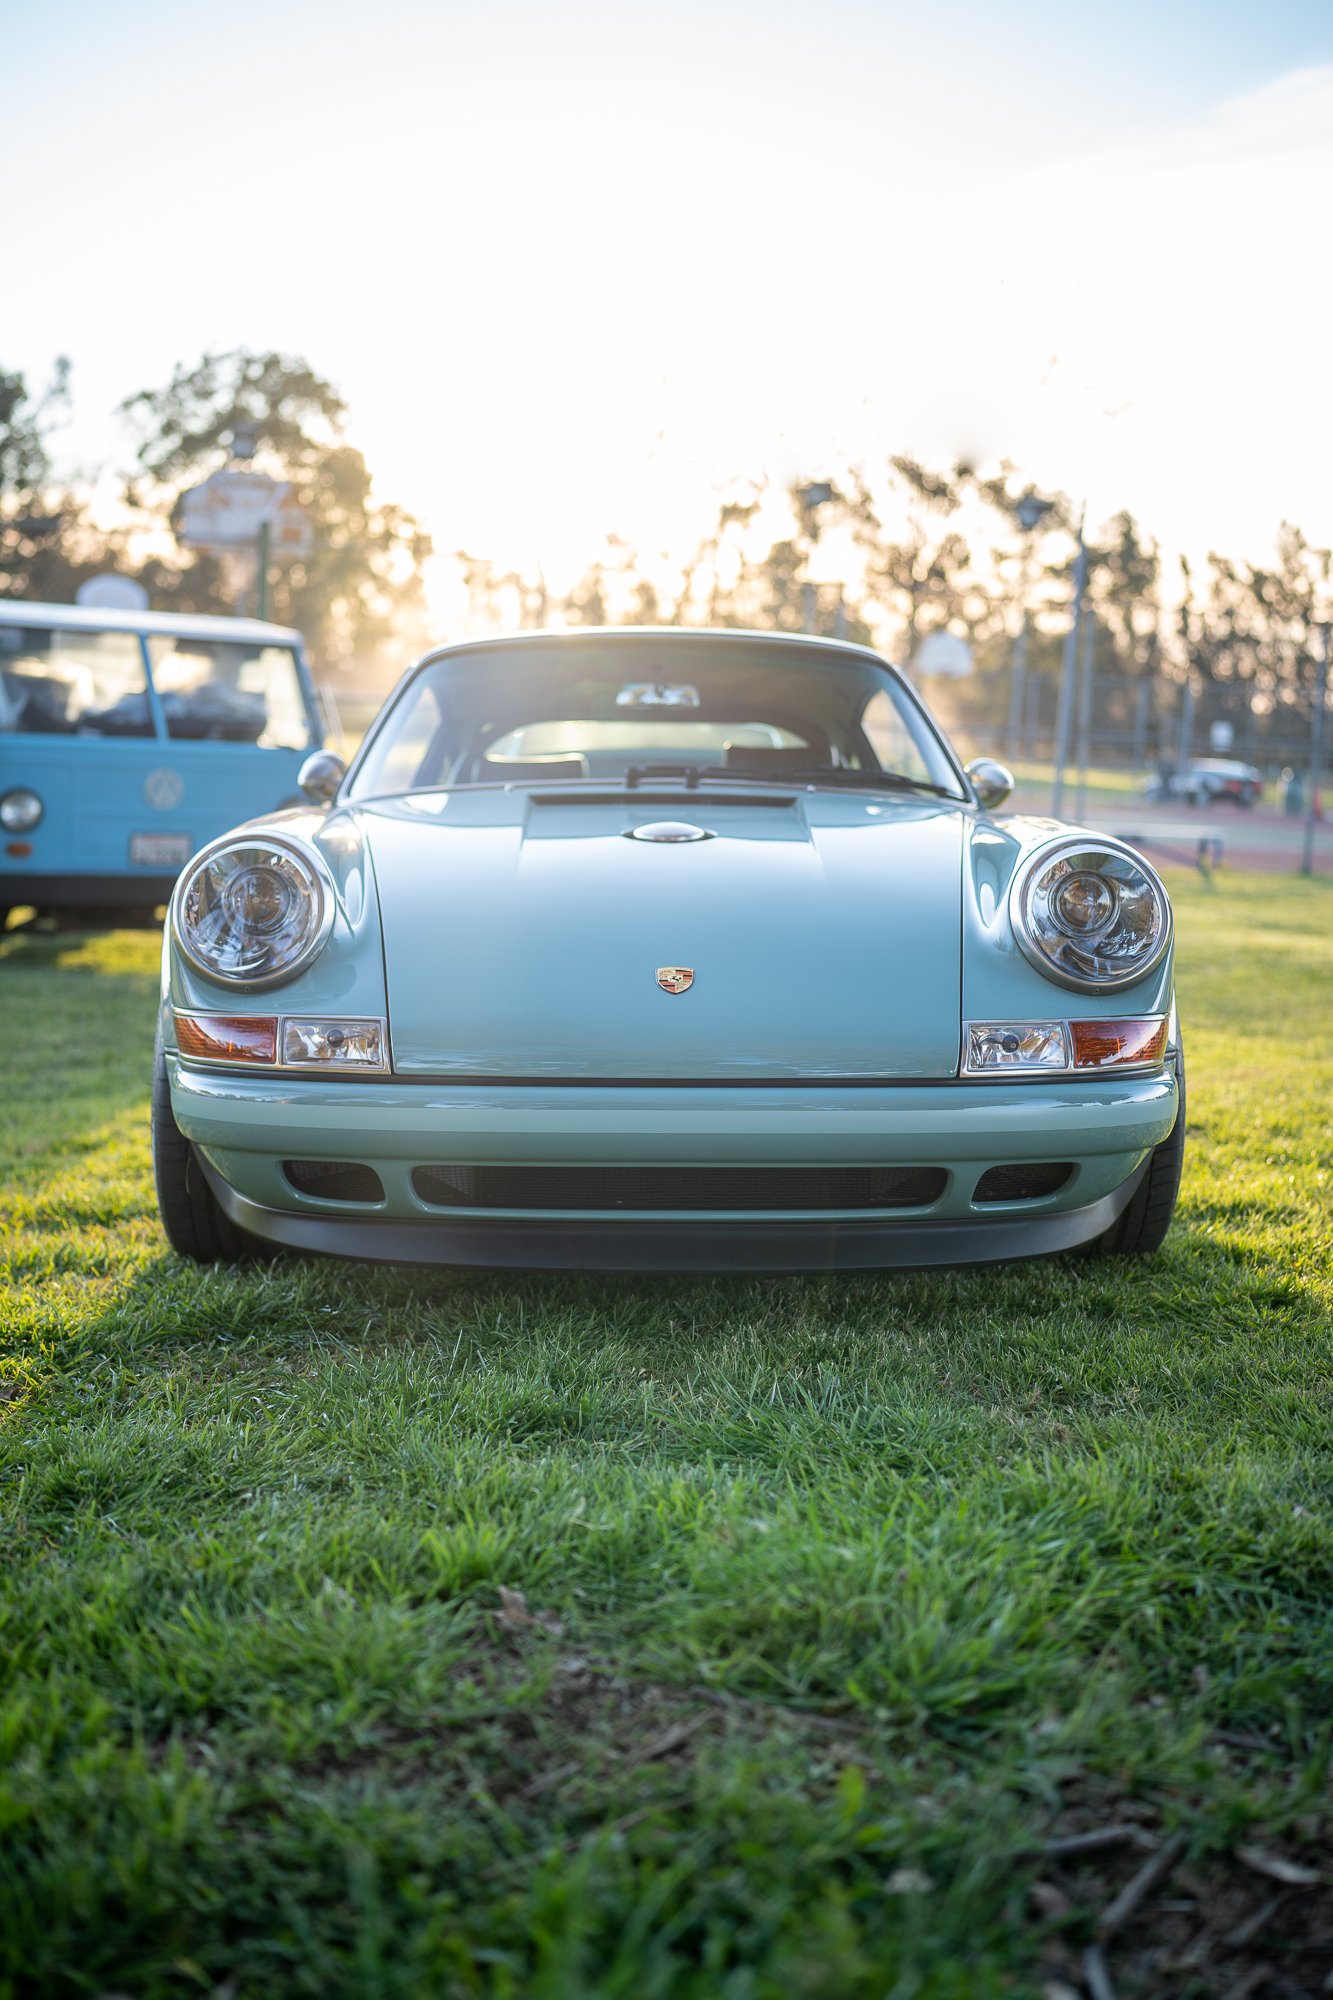 Frontend of a light blue Singer 911 in California